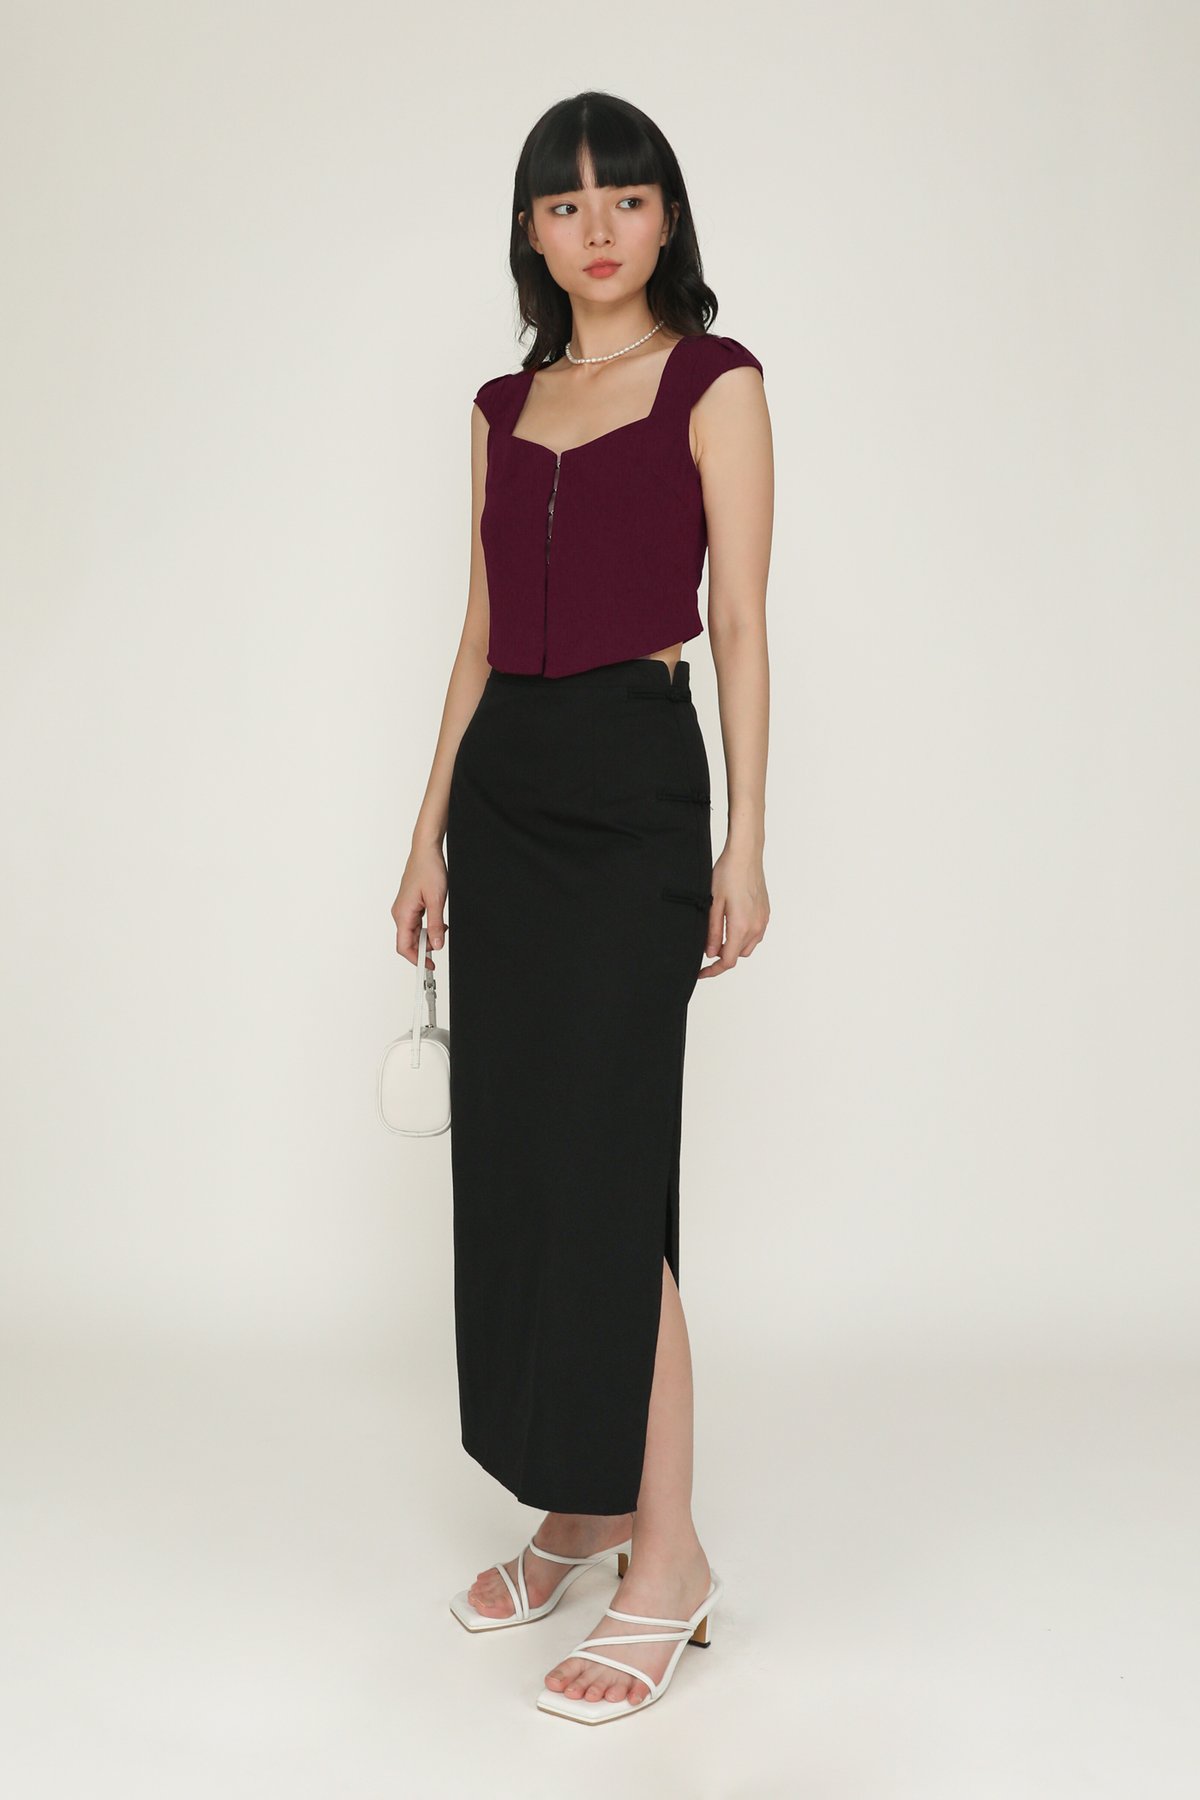 Ming Knotted Maxi Skirt (Black)